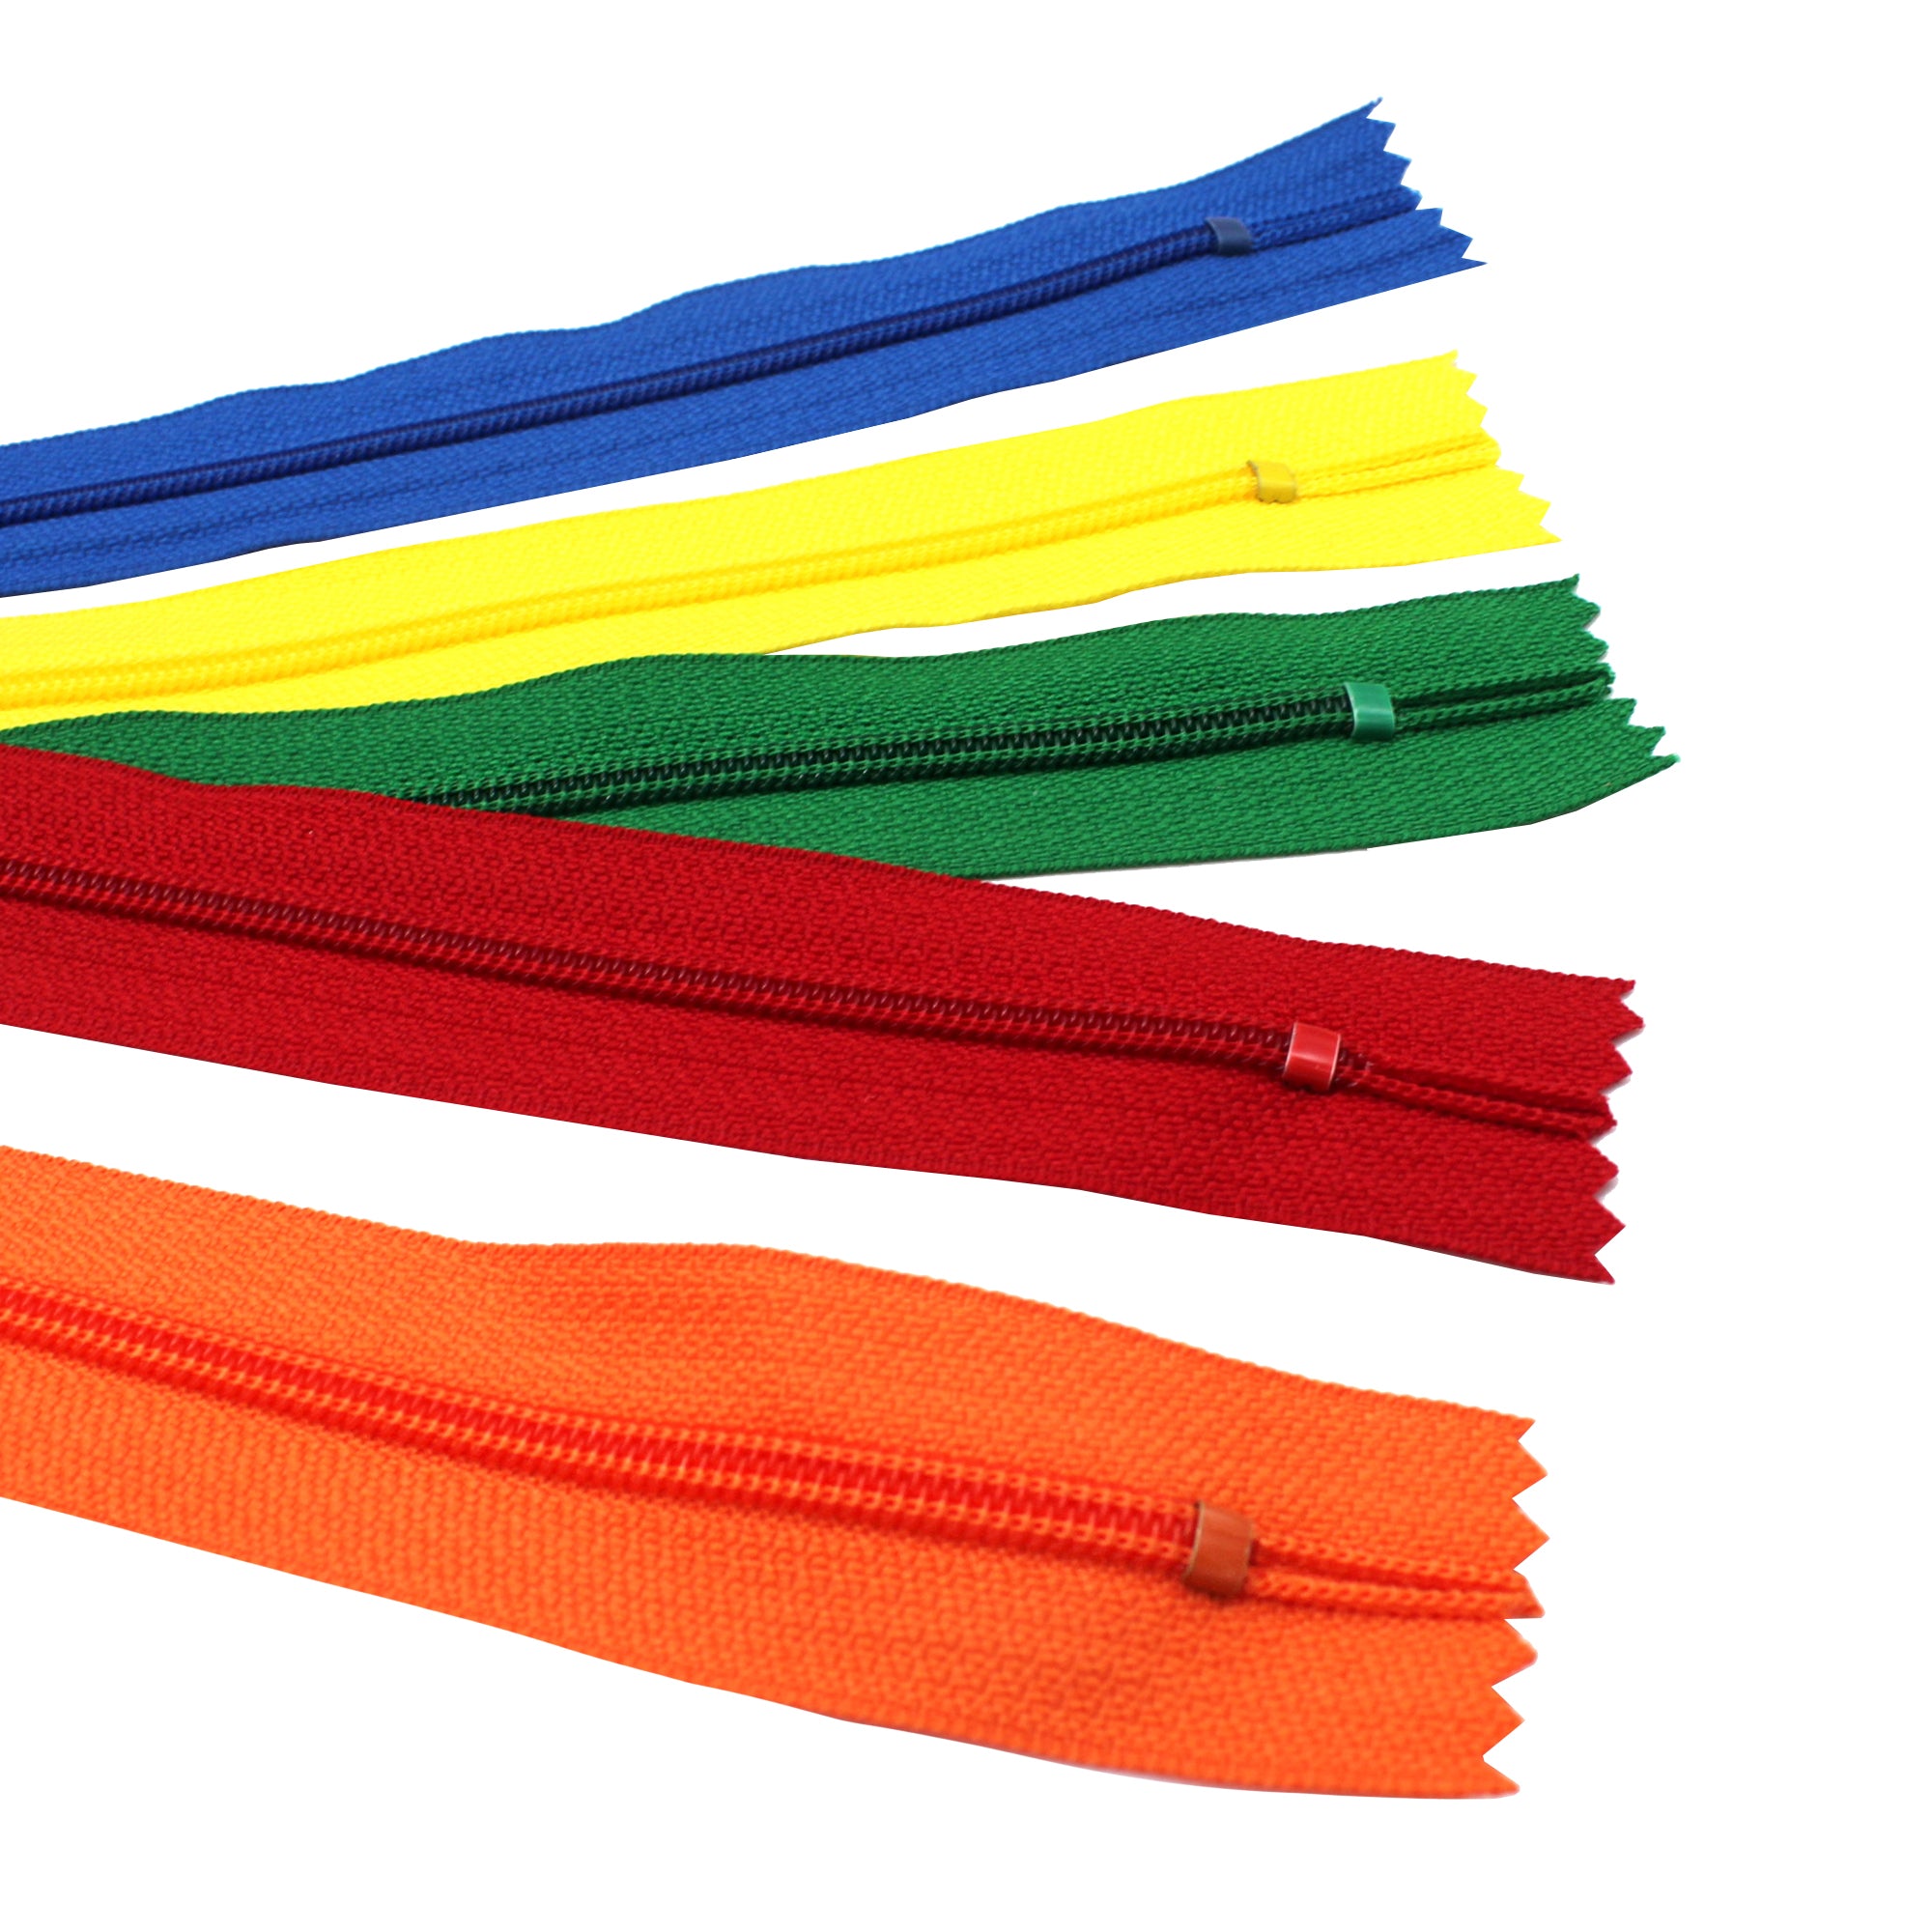 Metal Zippers For Leather Bags in Bangalore - Dealers, Manufacturers &  Suppliers - Justdial